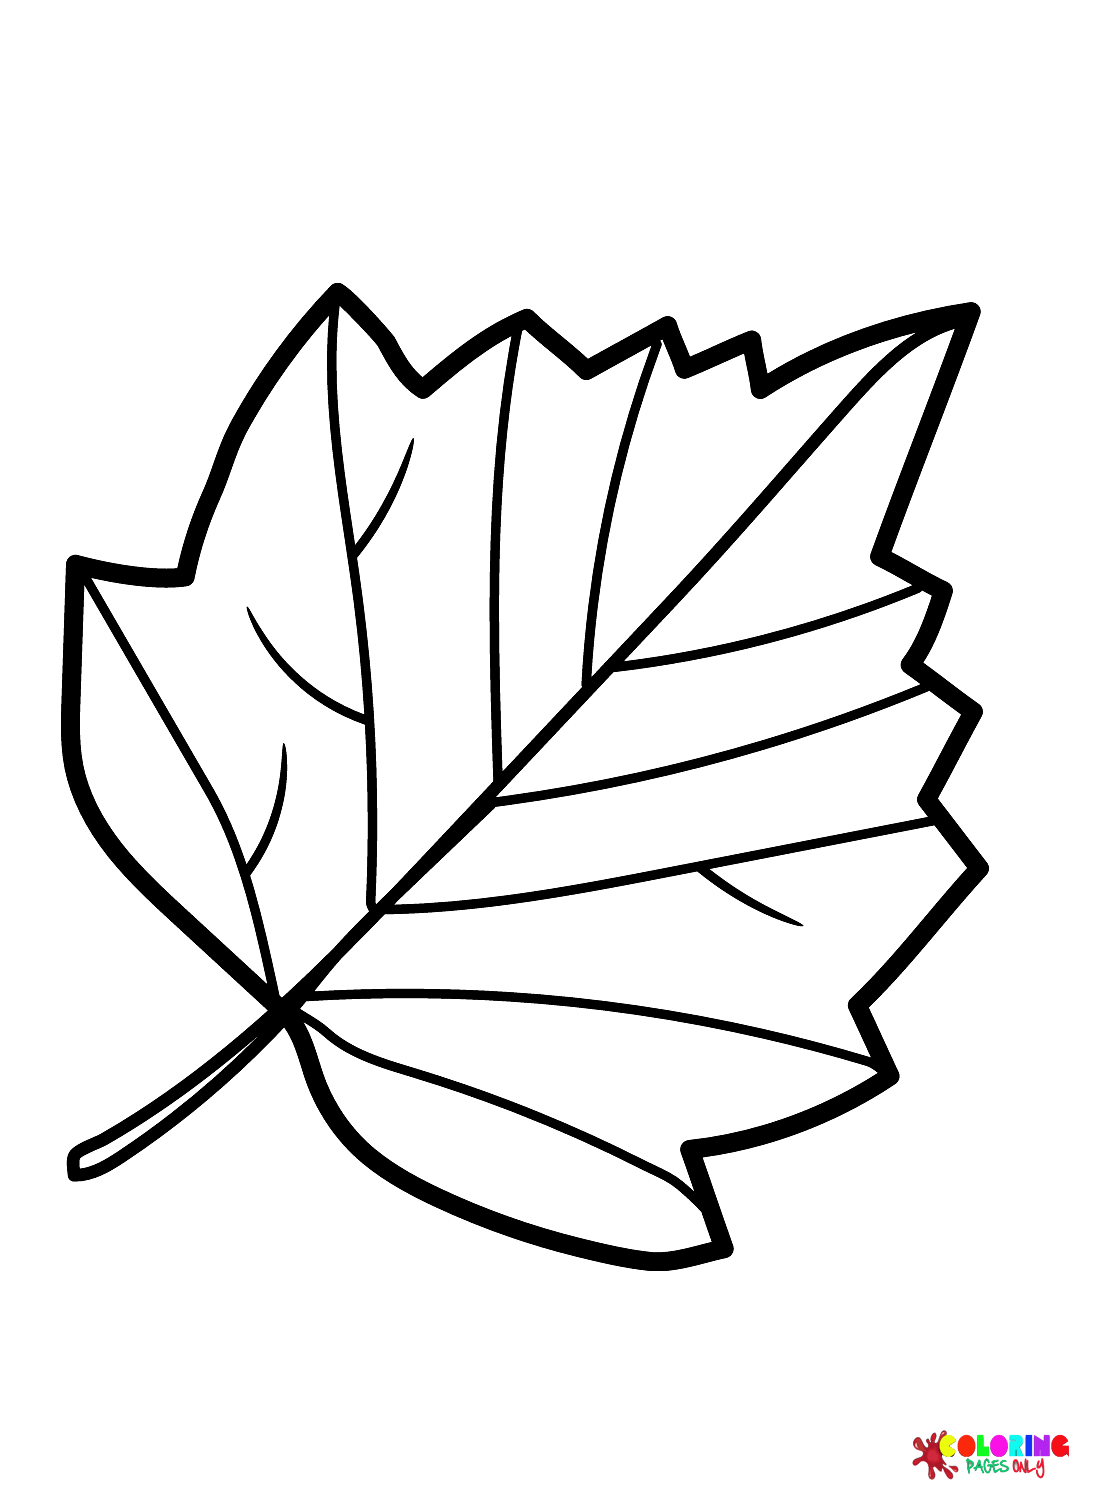 Leaves coloring pages printable for free download